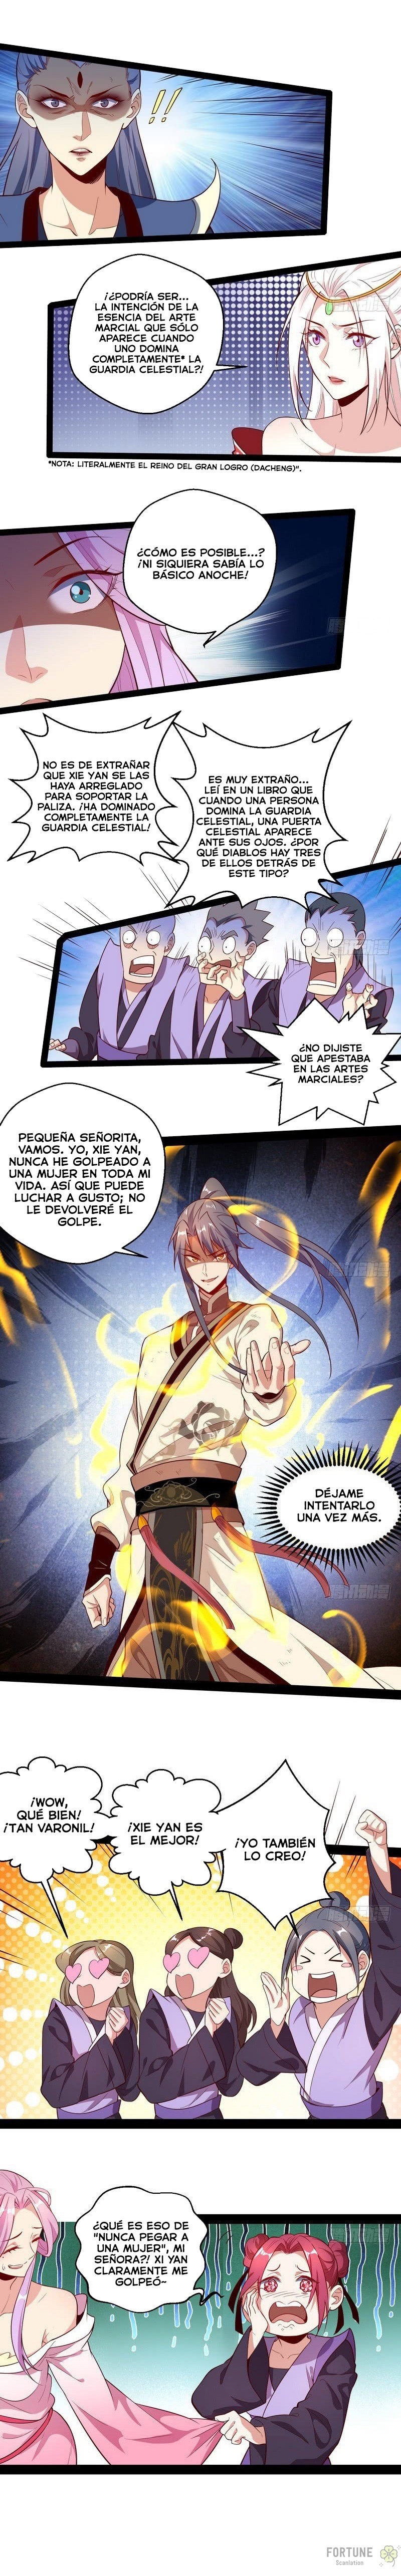 Manga Soy un dios maligno Chapter 15 image number 1